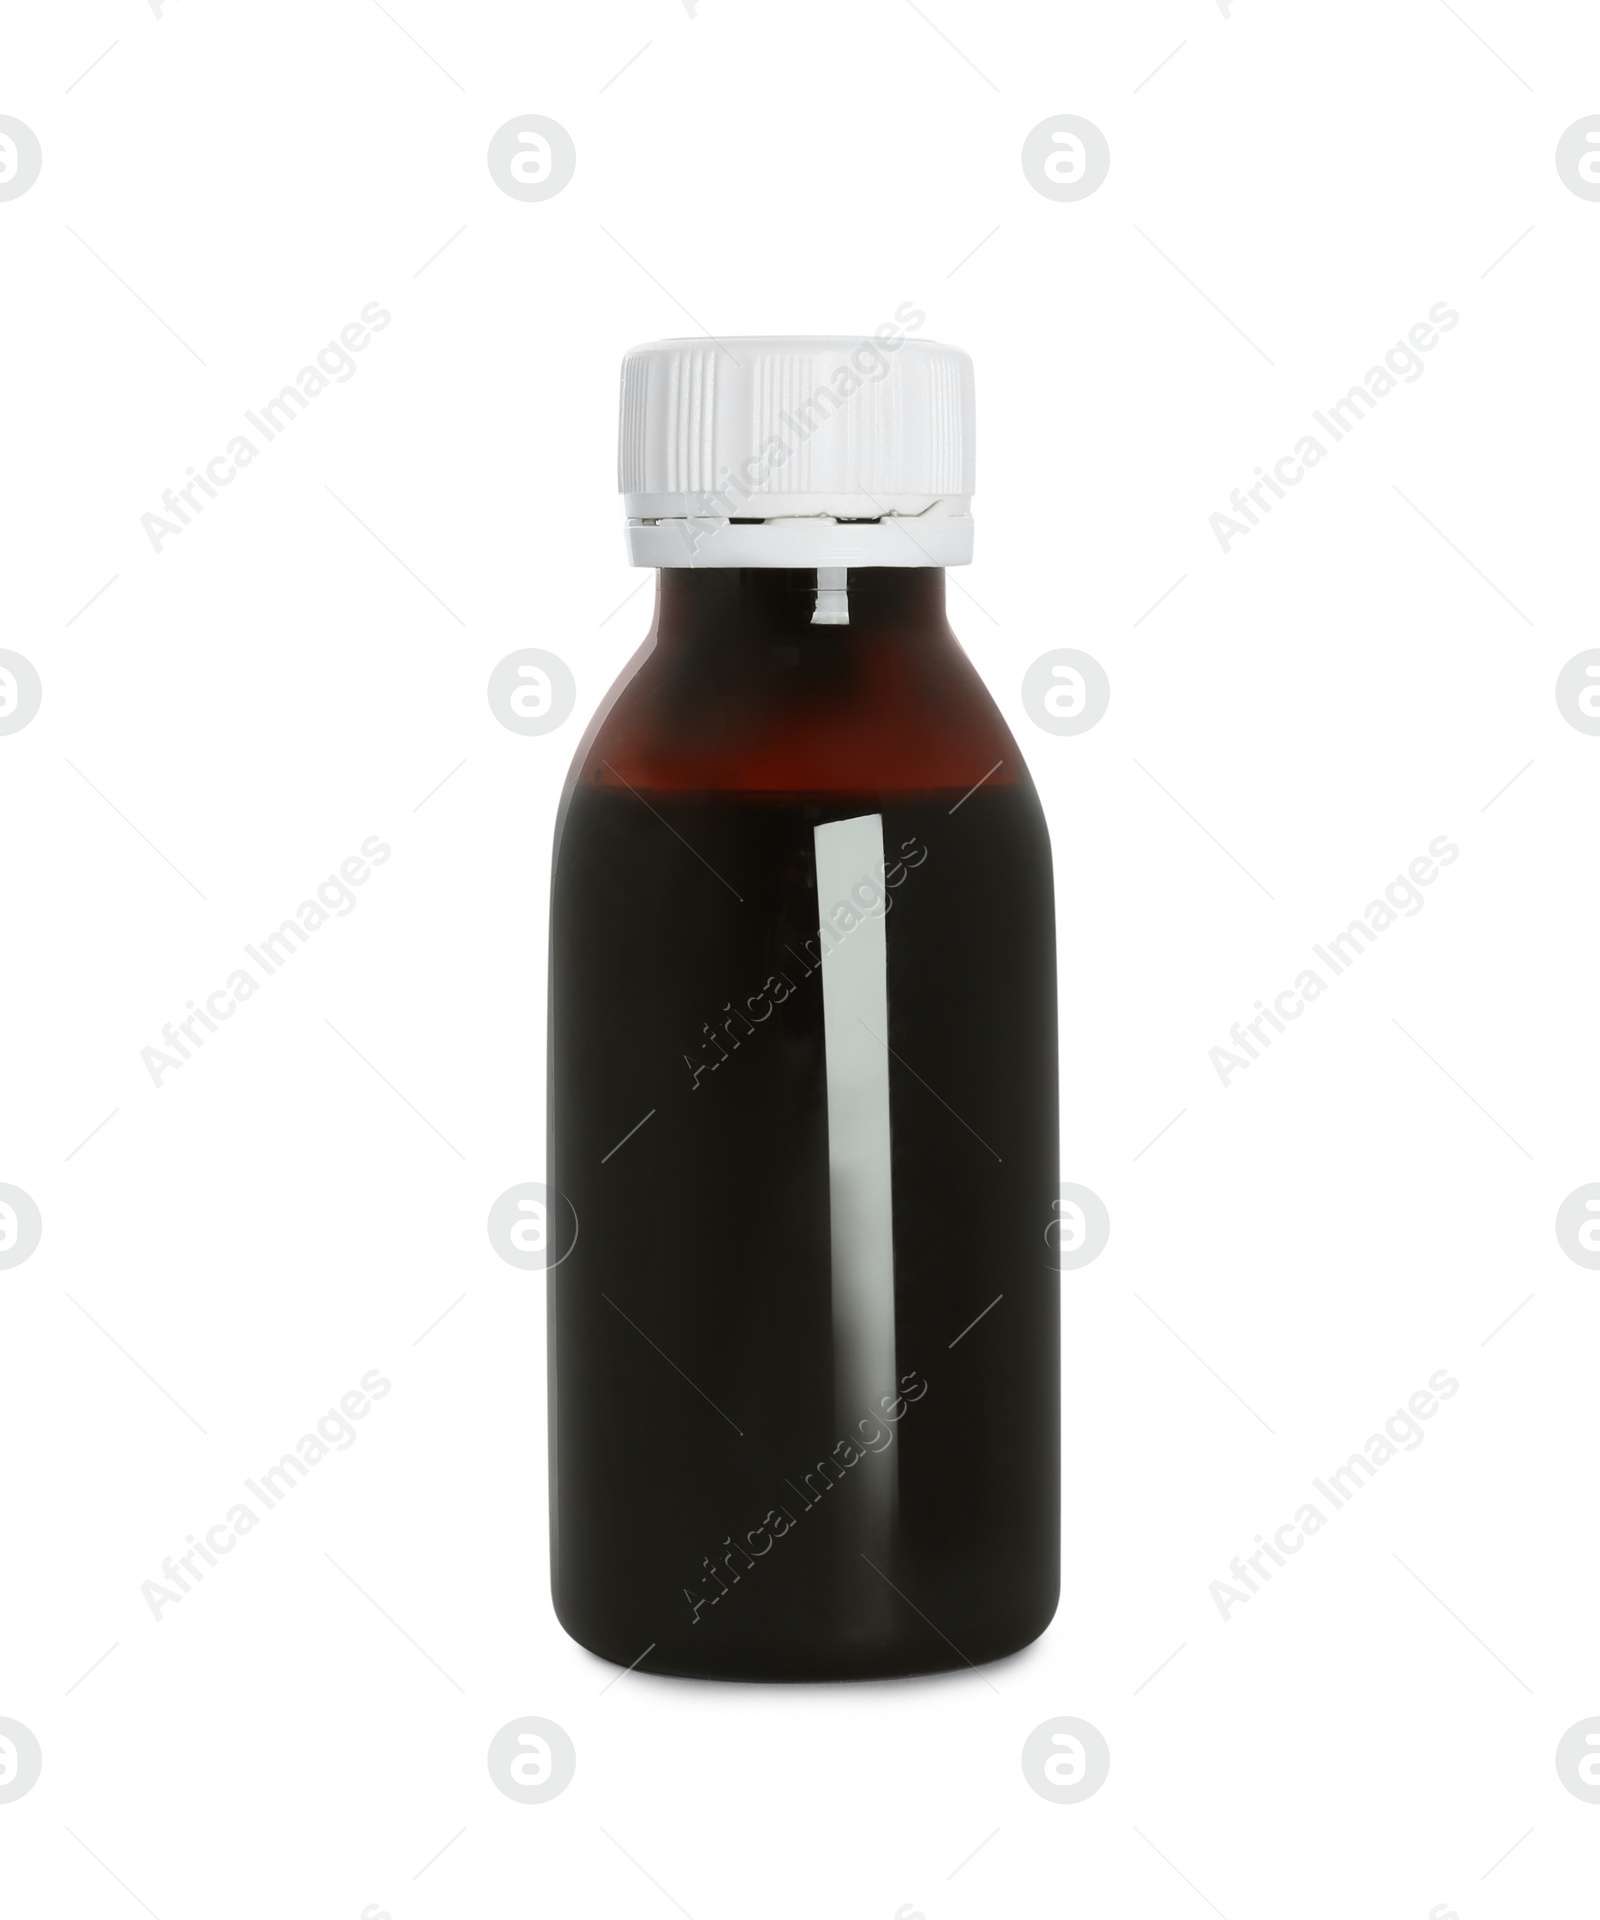 Photo of Bottle of cough syrup isolated on white